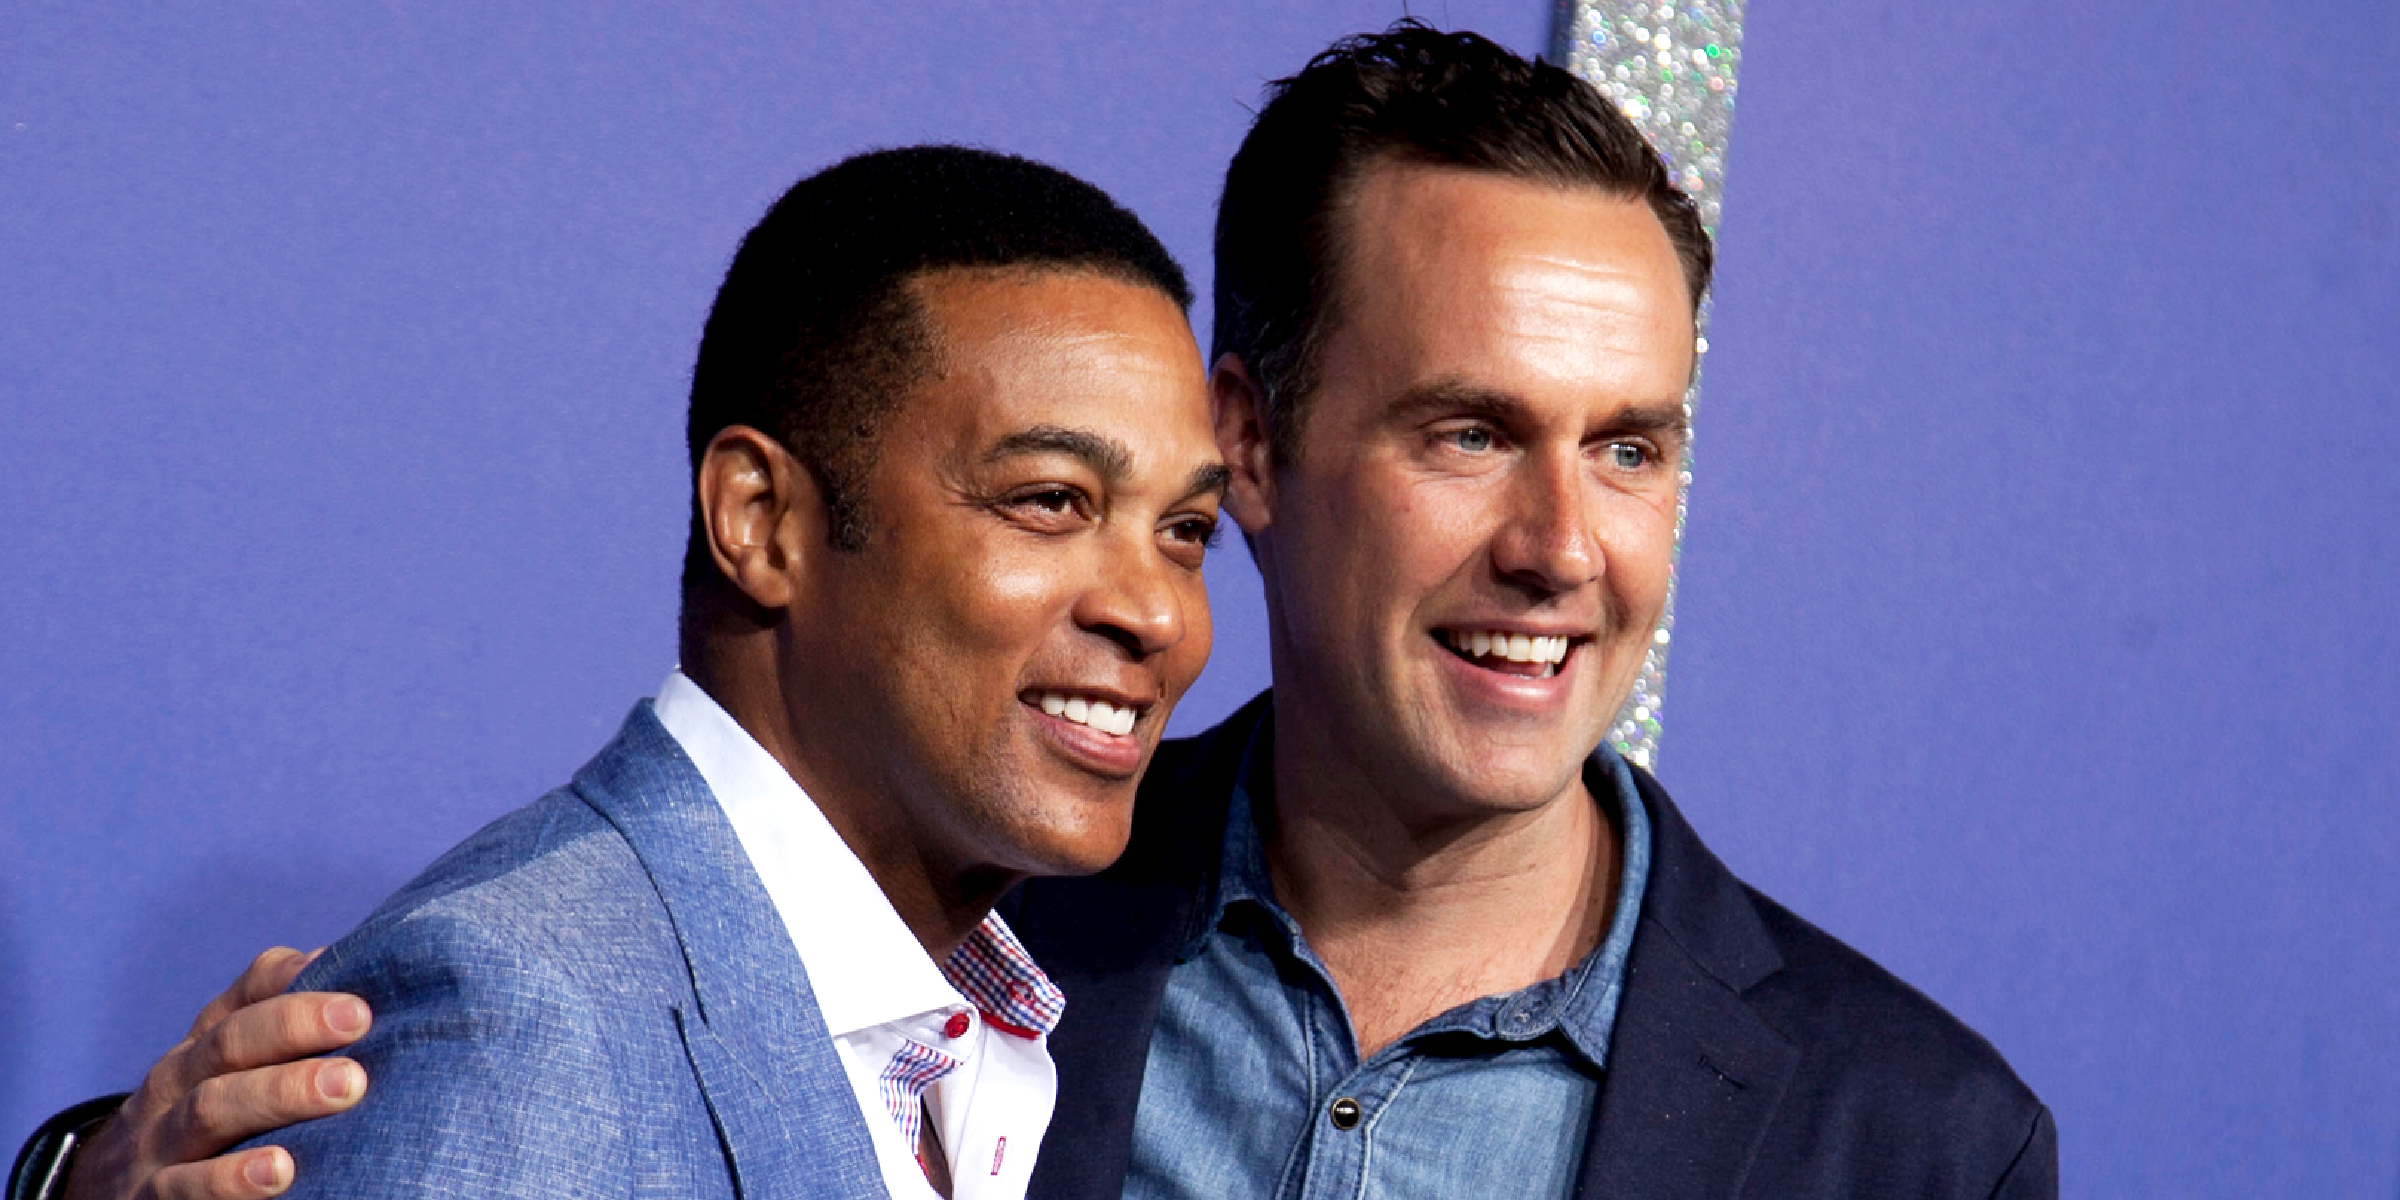 Don Lemon with his fiancé Tim Malone | Source: Getty Images